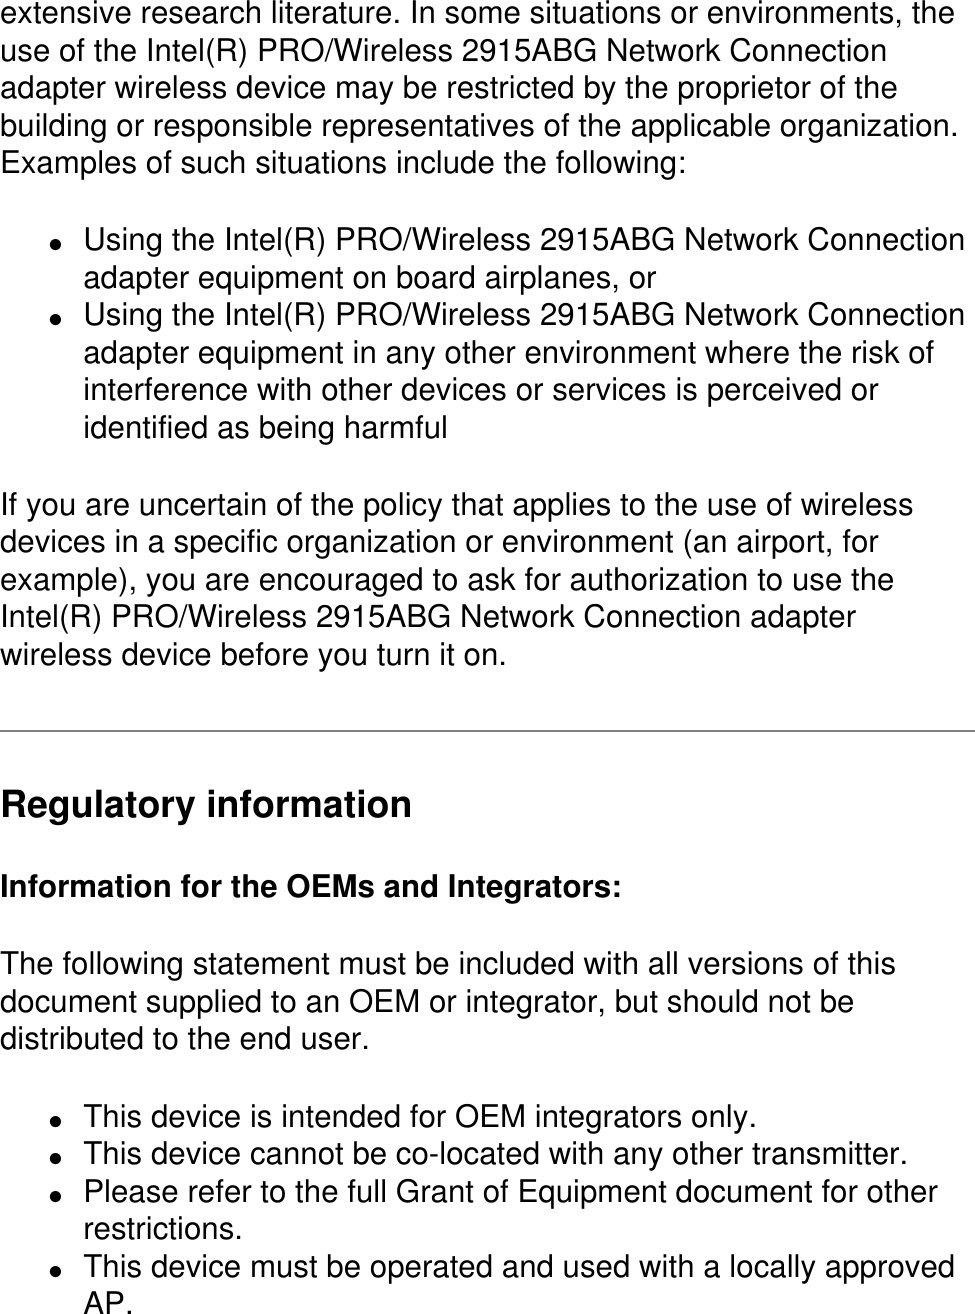 extensive research literature. In some situations or environments, the use of the Intel(R) PRO/Wireless 2915ABG Network Connection adapter wireless device may be restricted by the proprietor of the building or responsible representatives of the applicable organization. Examples of such situations include the following:●     Using the Intel(R) PRO/Wireless 2915ABG Network Connection adapter equipment on board airplanes, or ●     Using the Intel(R) PRO/Wireless 2915ABG Network Connection adapter equipment in any other environment where the risk of interference with other devices or services is perceived or identified as being harmfulIf you are uncertain of the policy that applies to the use of wireless devices in a specific organization or environment (an airport, for example), you are encouraged to ask for authorization to use the Intel(R) PRO/Wireless 2915ABG Network Connection adapter wireless device before you turn it on.Regulatory informationInformation for the OEMs and Integrators:  The following statement must be included with all versions of this document supplied to an OEM or integrator, but should not be distributed to the end user. ●     This device is intended for OEM integrators only. ●     This device cannot be co-located with any other transmitter.●     Please refer to the full Grant of Equipment document for other restrictions.●     This device must be operated and used with a locally approved AP.